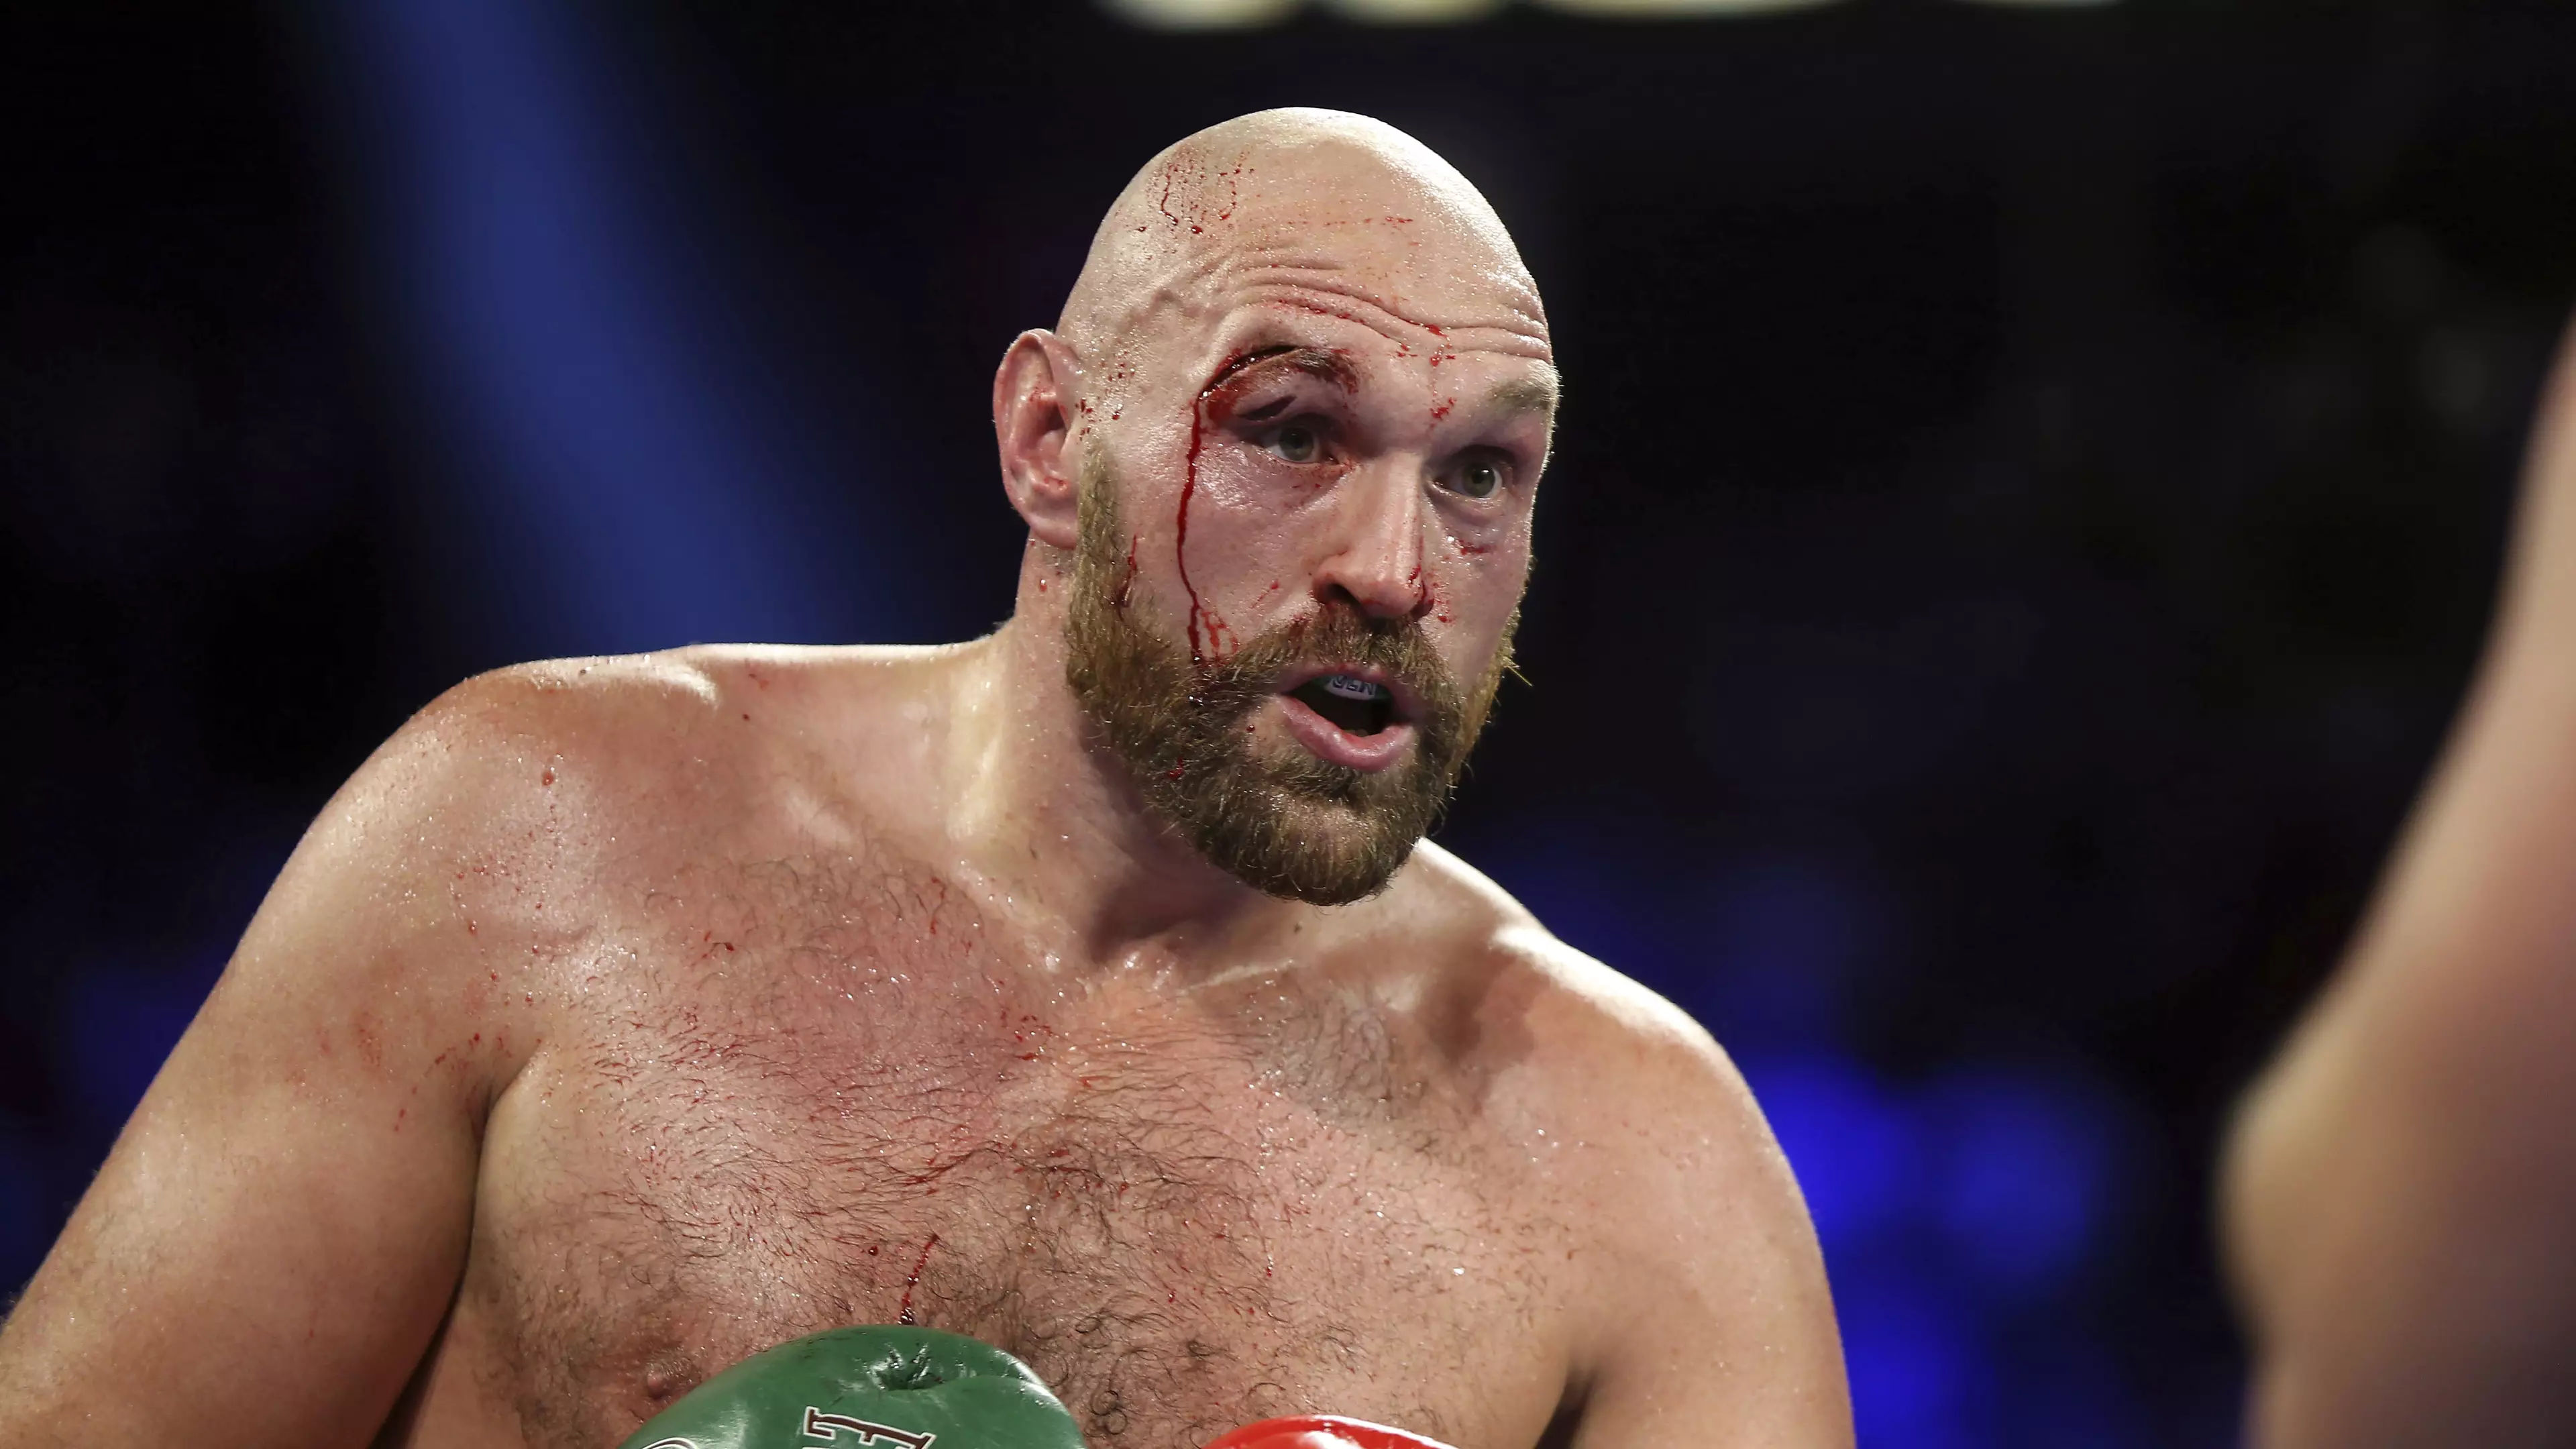 Tyson Fury Says He Had 40 Stitches And A Few Beers After Wallin Fight